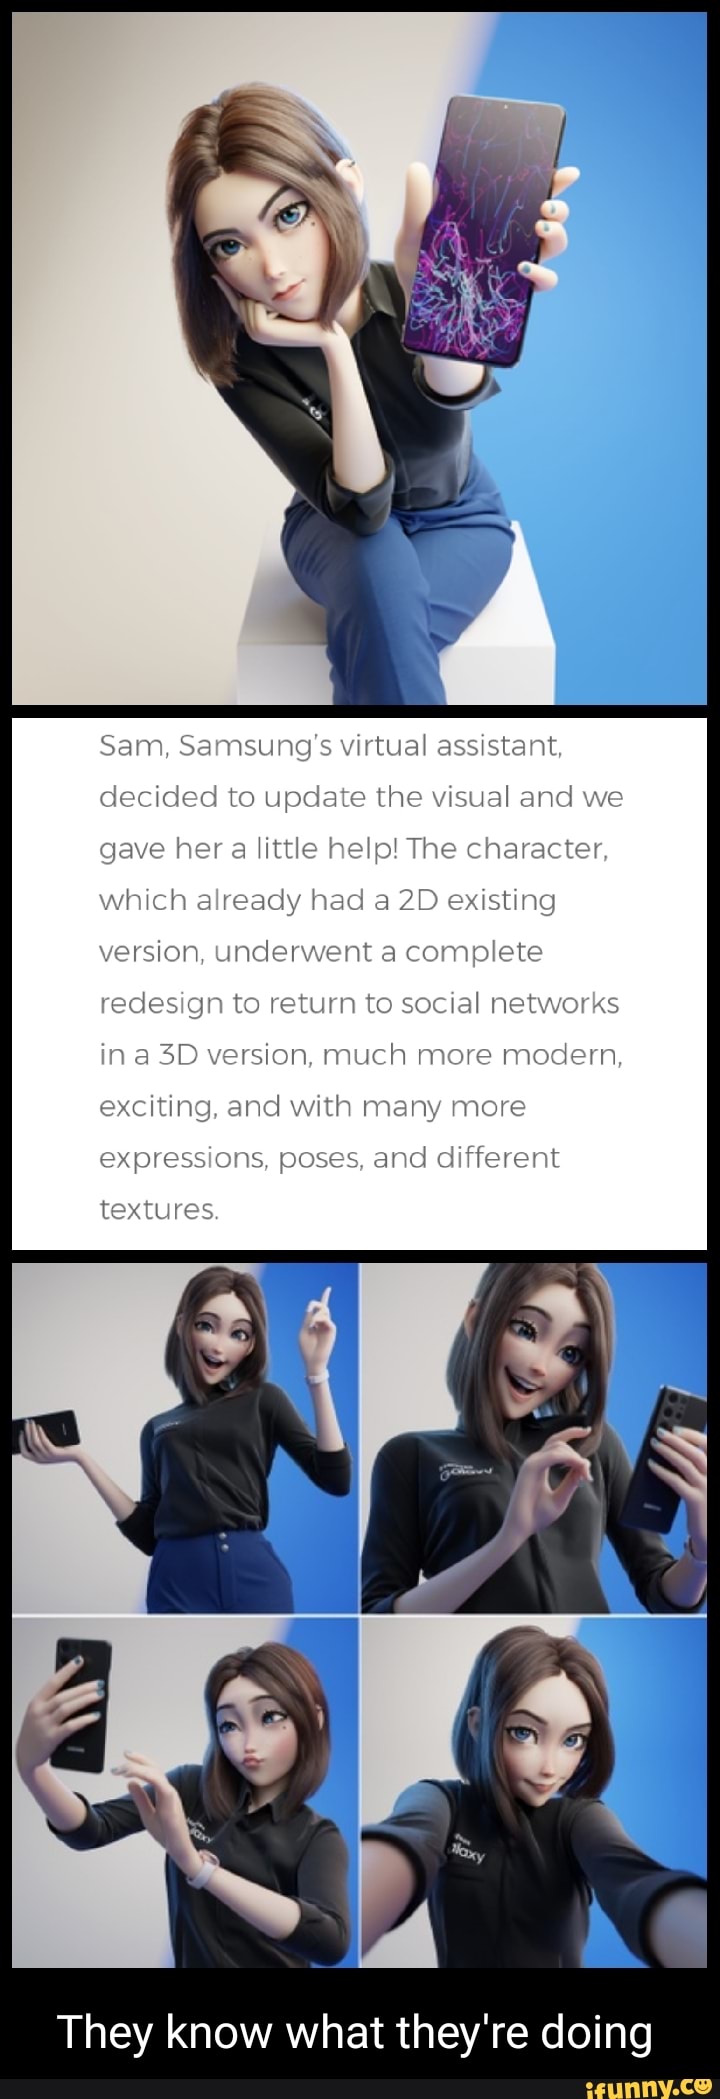 Samsung knows EXACTLY what they're doing, Samsung Sam